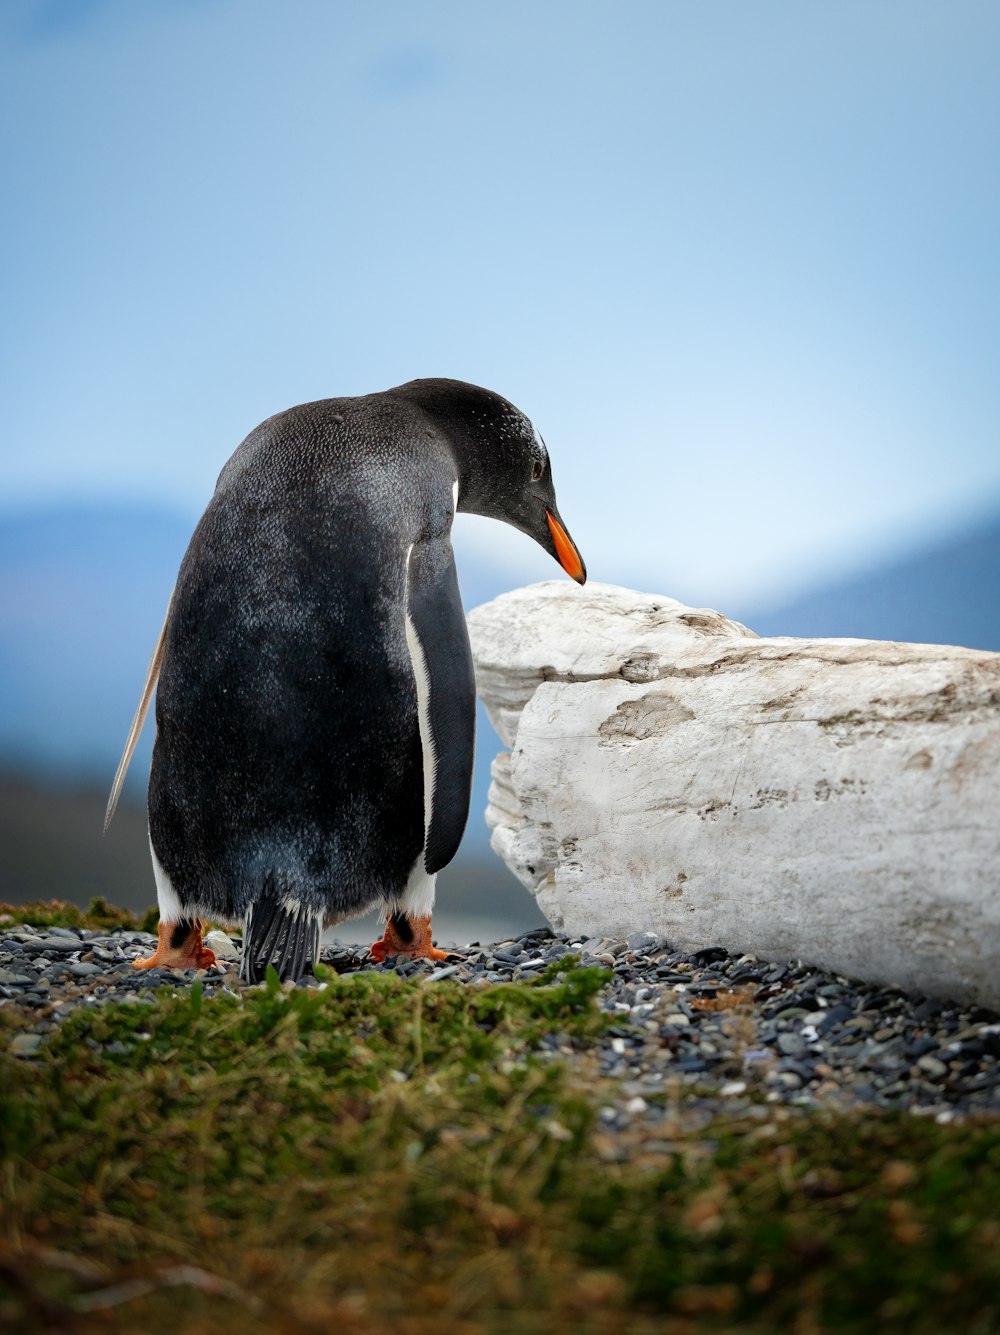 a penguin with an orange beak standing next to a rock